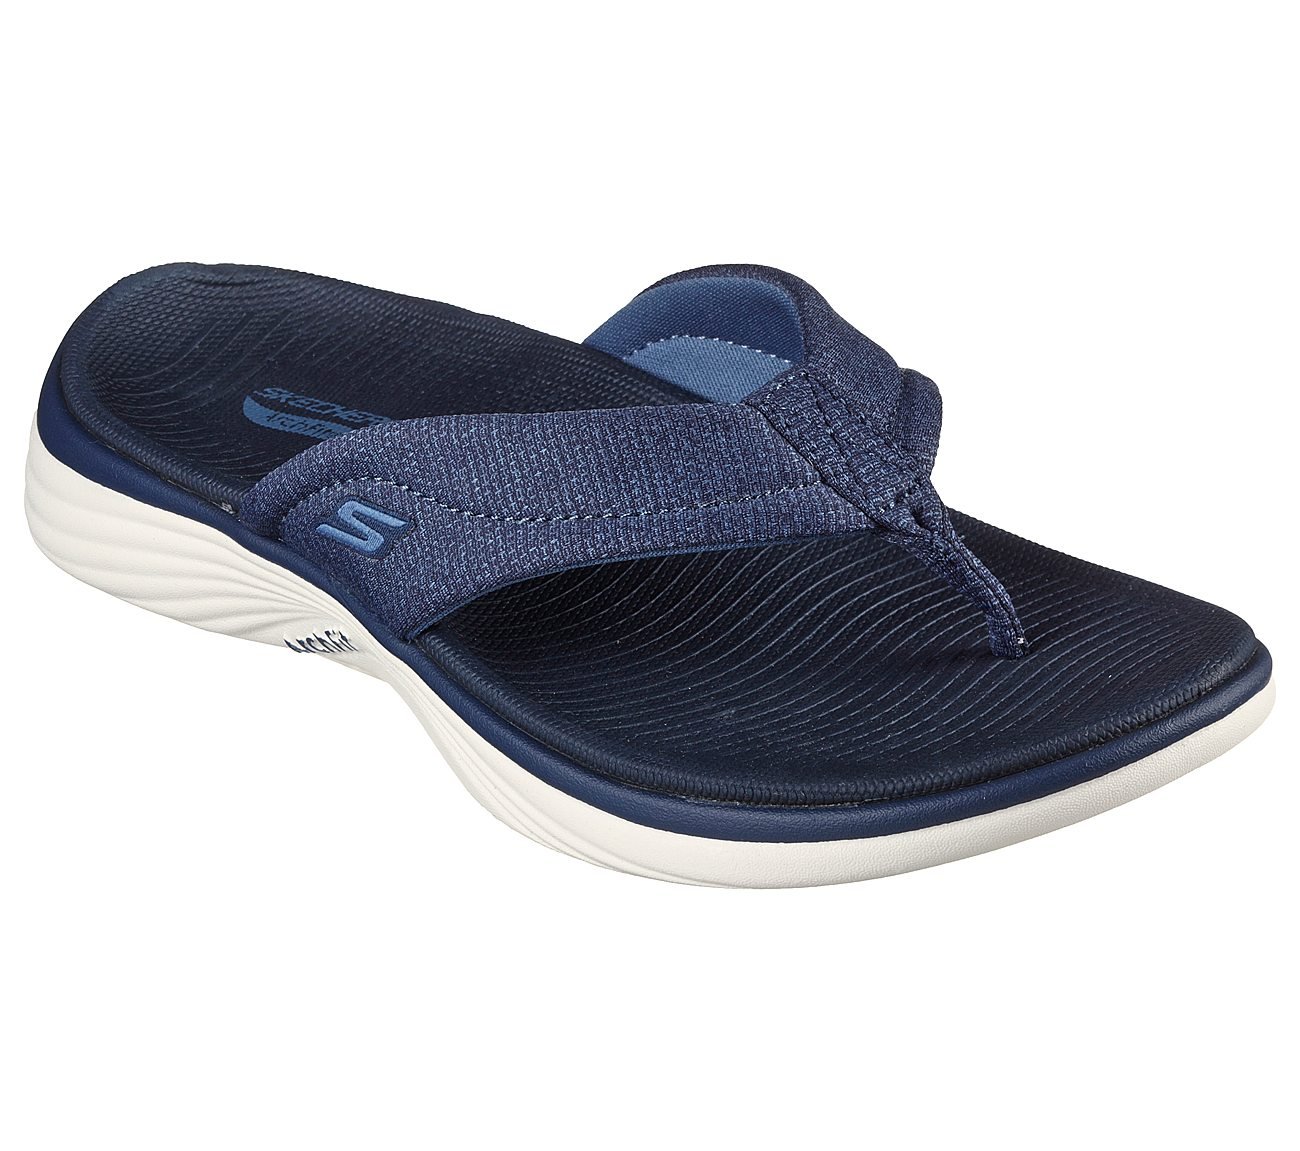 ARCH FIT RADIANCE - GLEAM, NNNAVY Footwear Right View